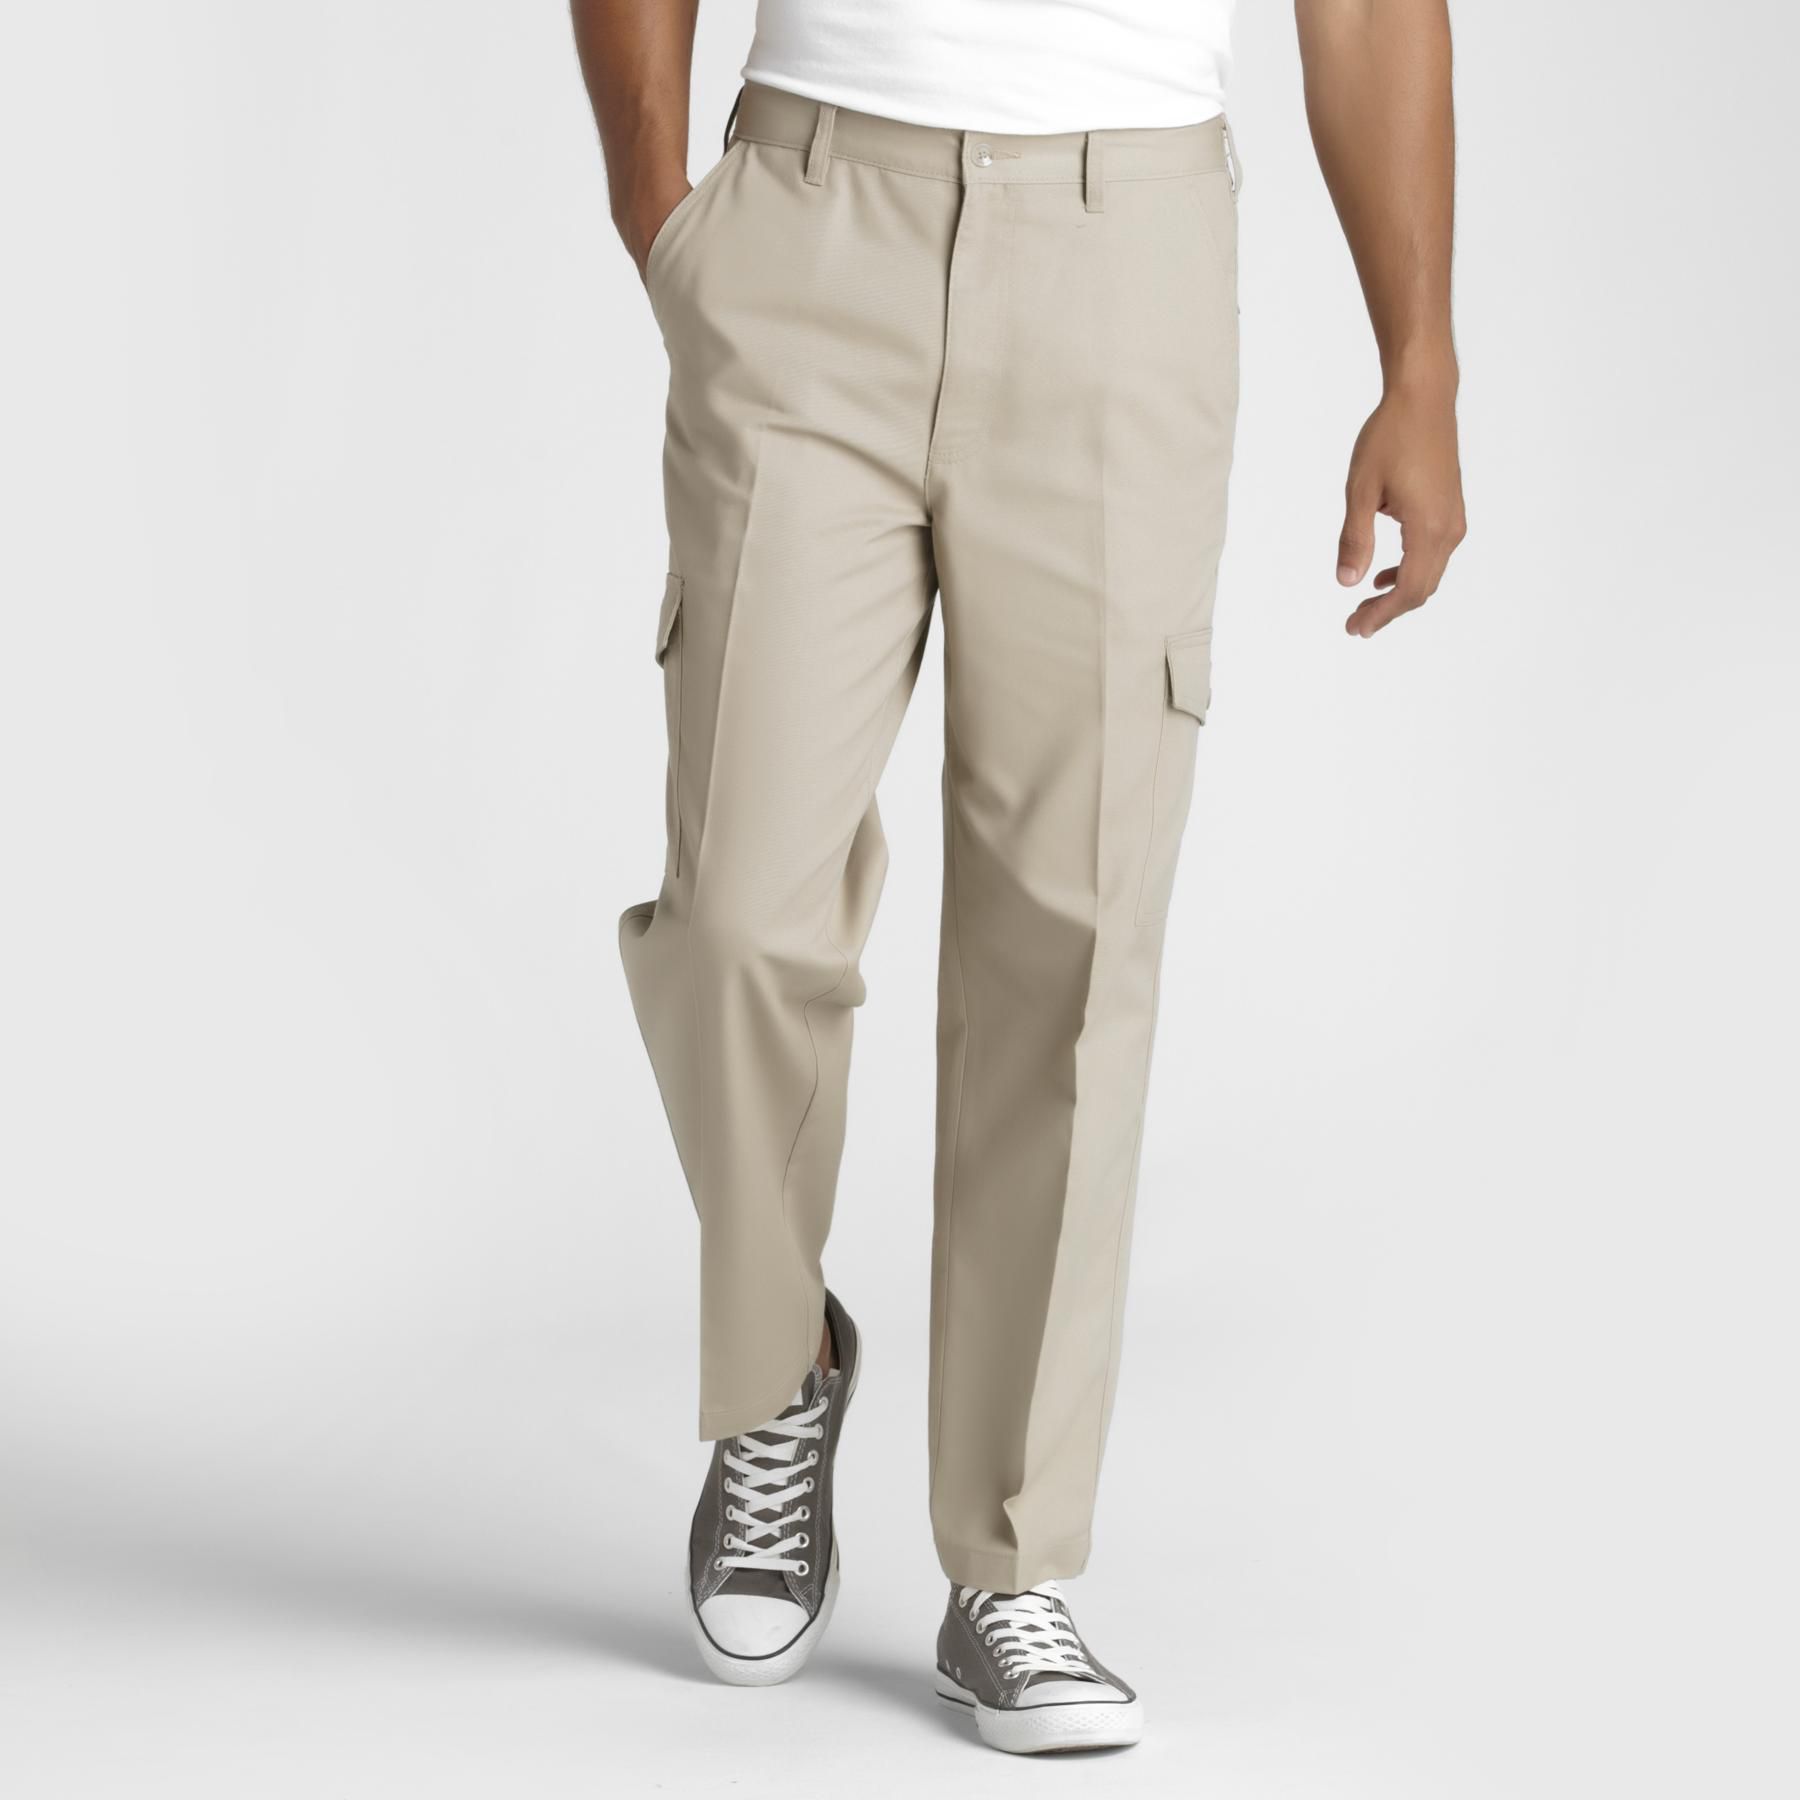 David Taylor Collection Men's Twill Cargo Pants